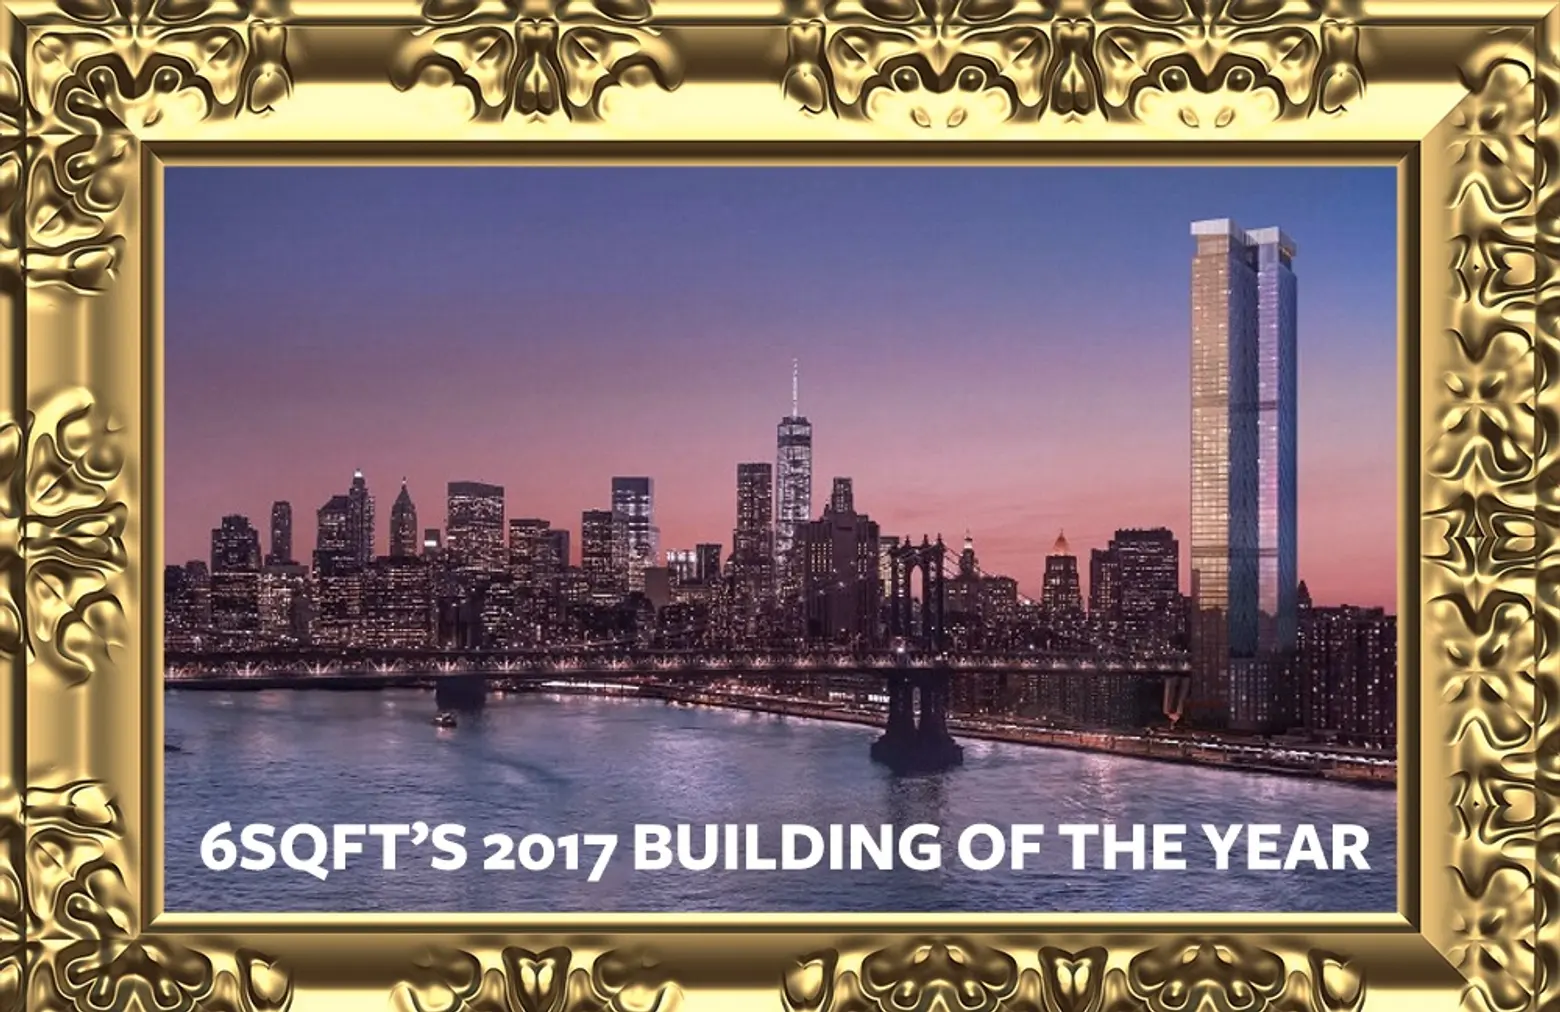 Announcing 6sqft’s 2017 Building of the Year!